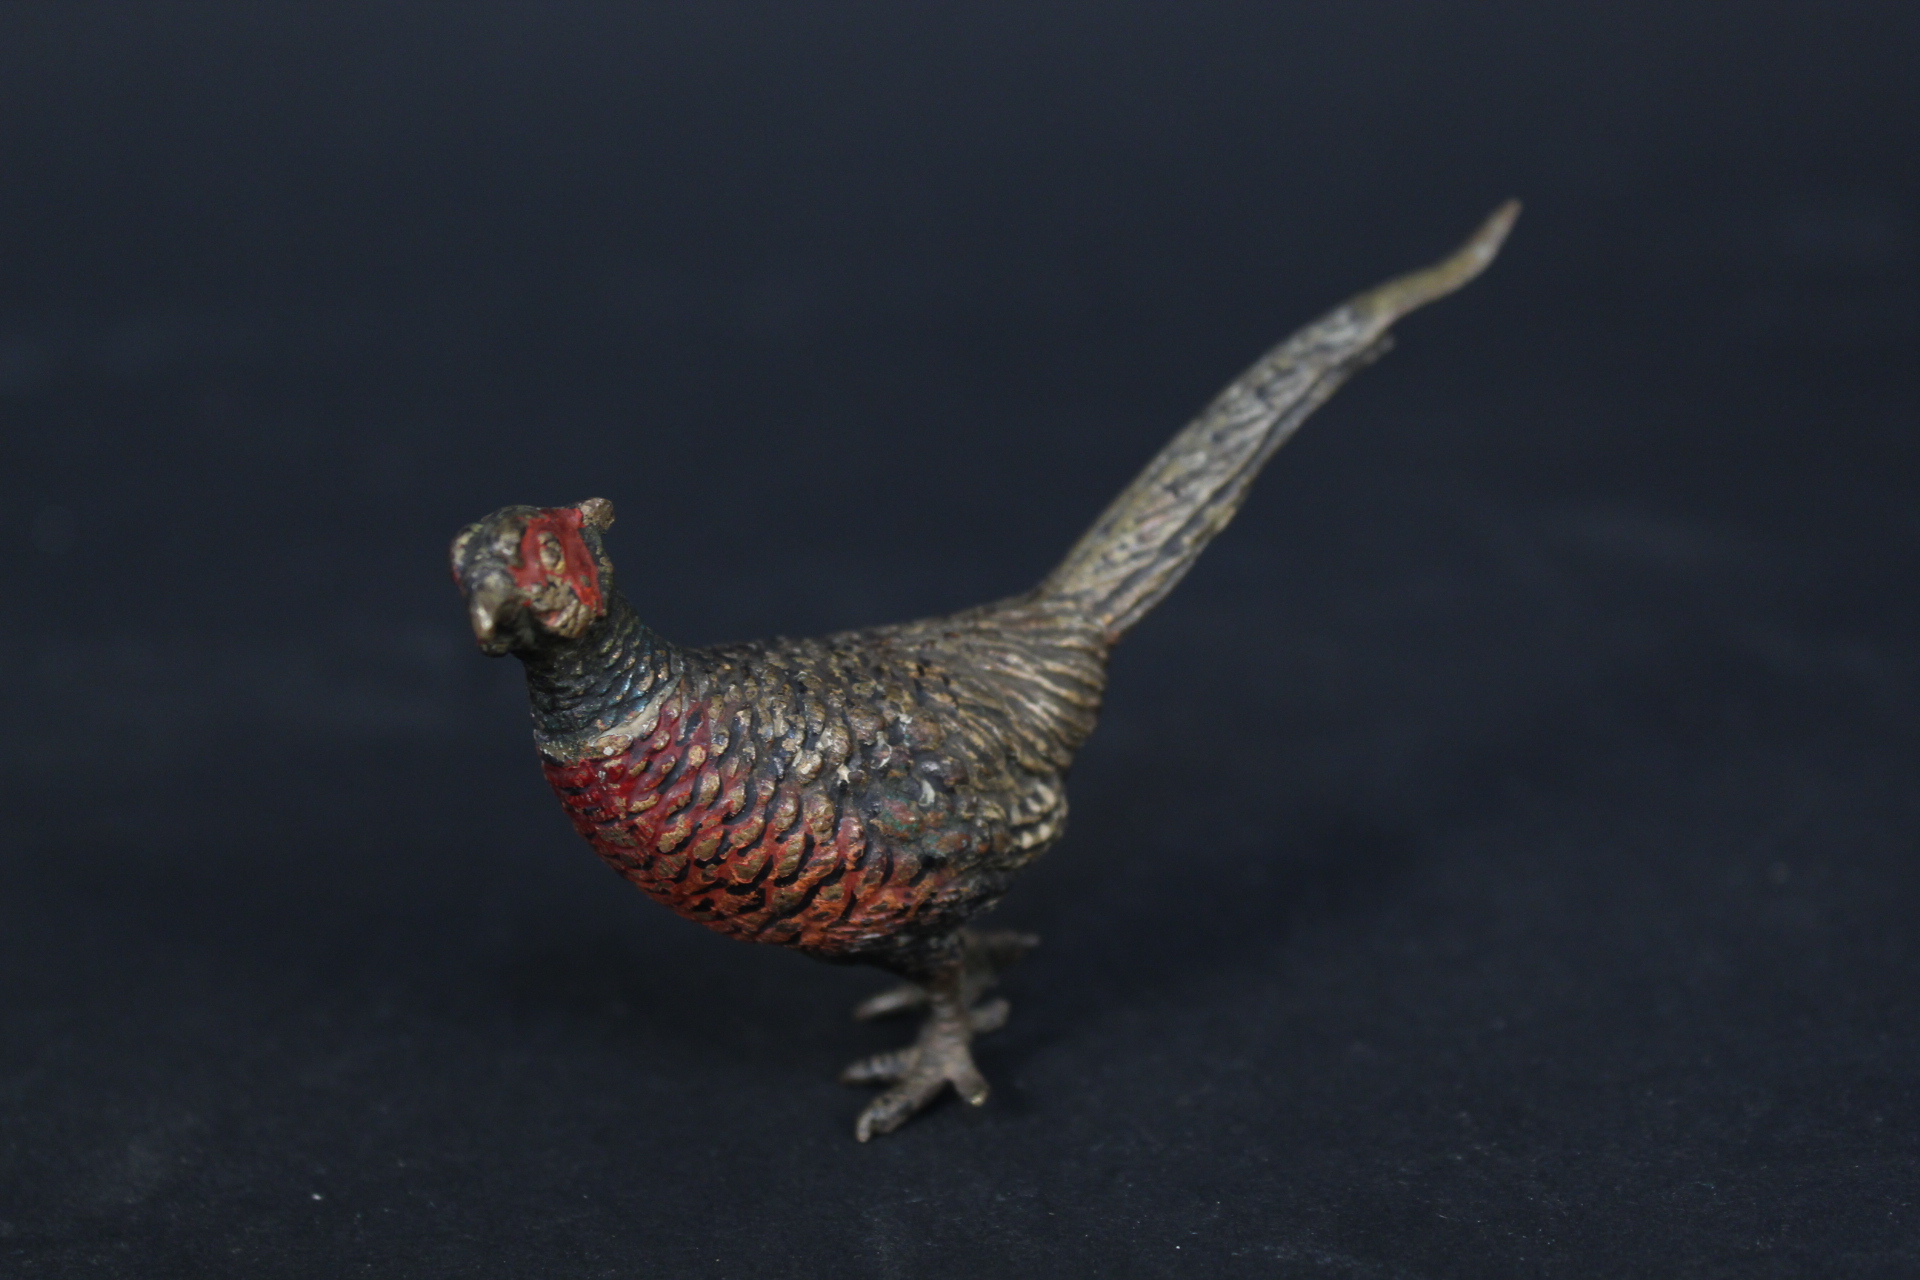 A cold painted model of a pheasant